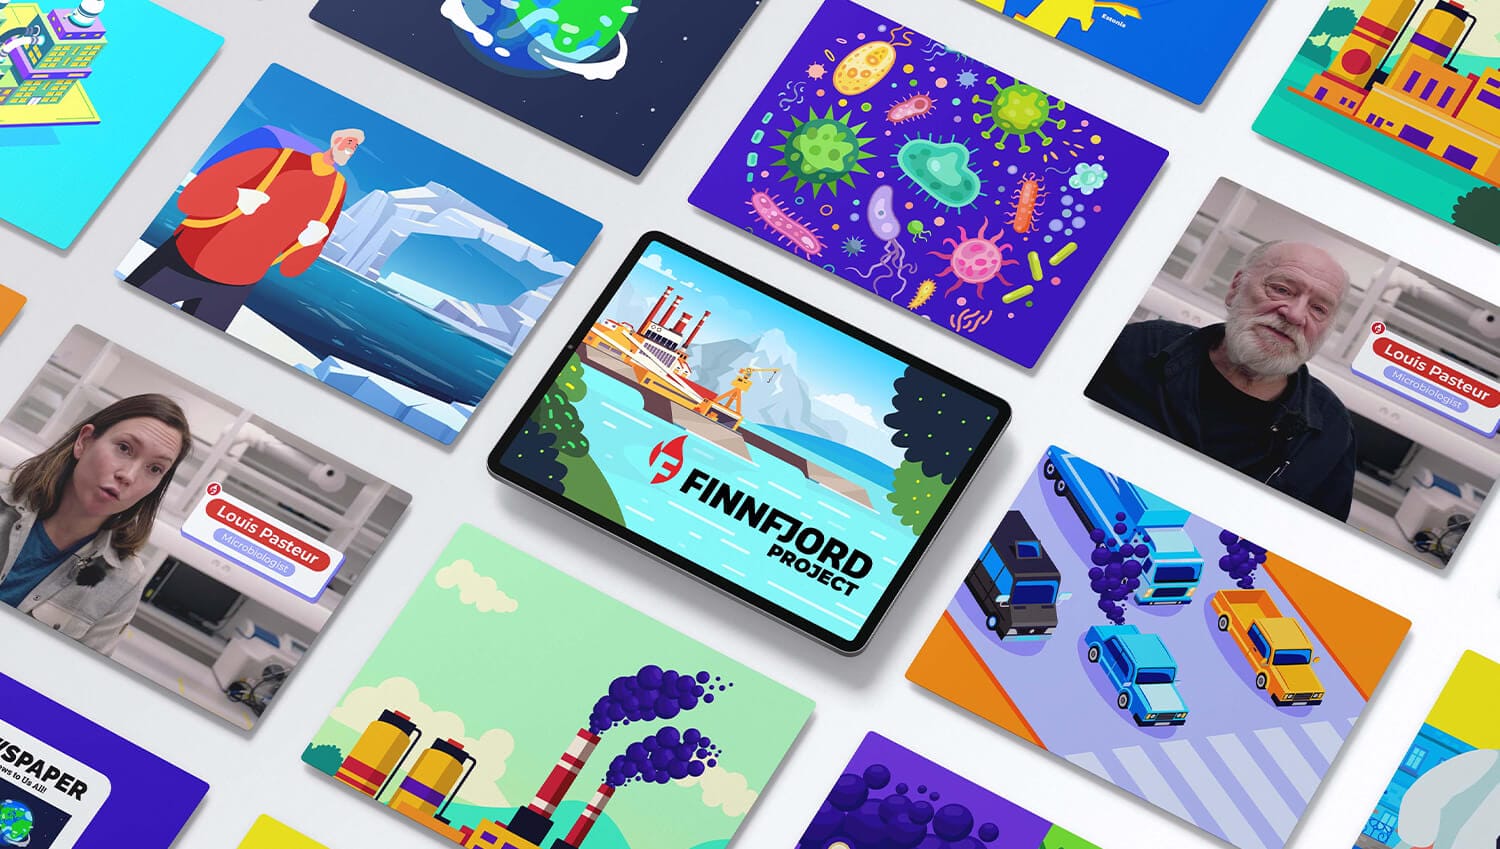 A group of colorful ipads with a variety of images on them.